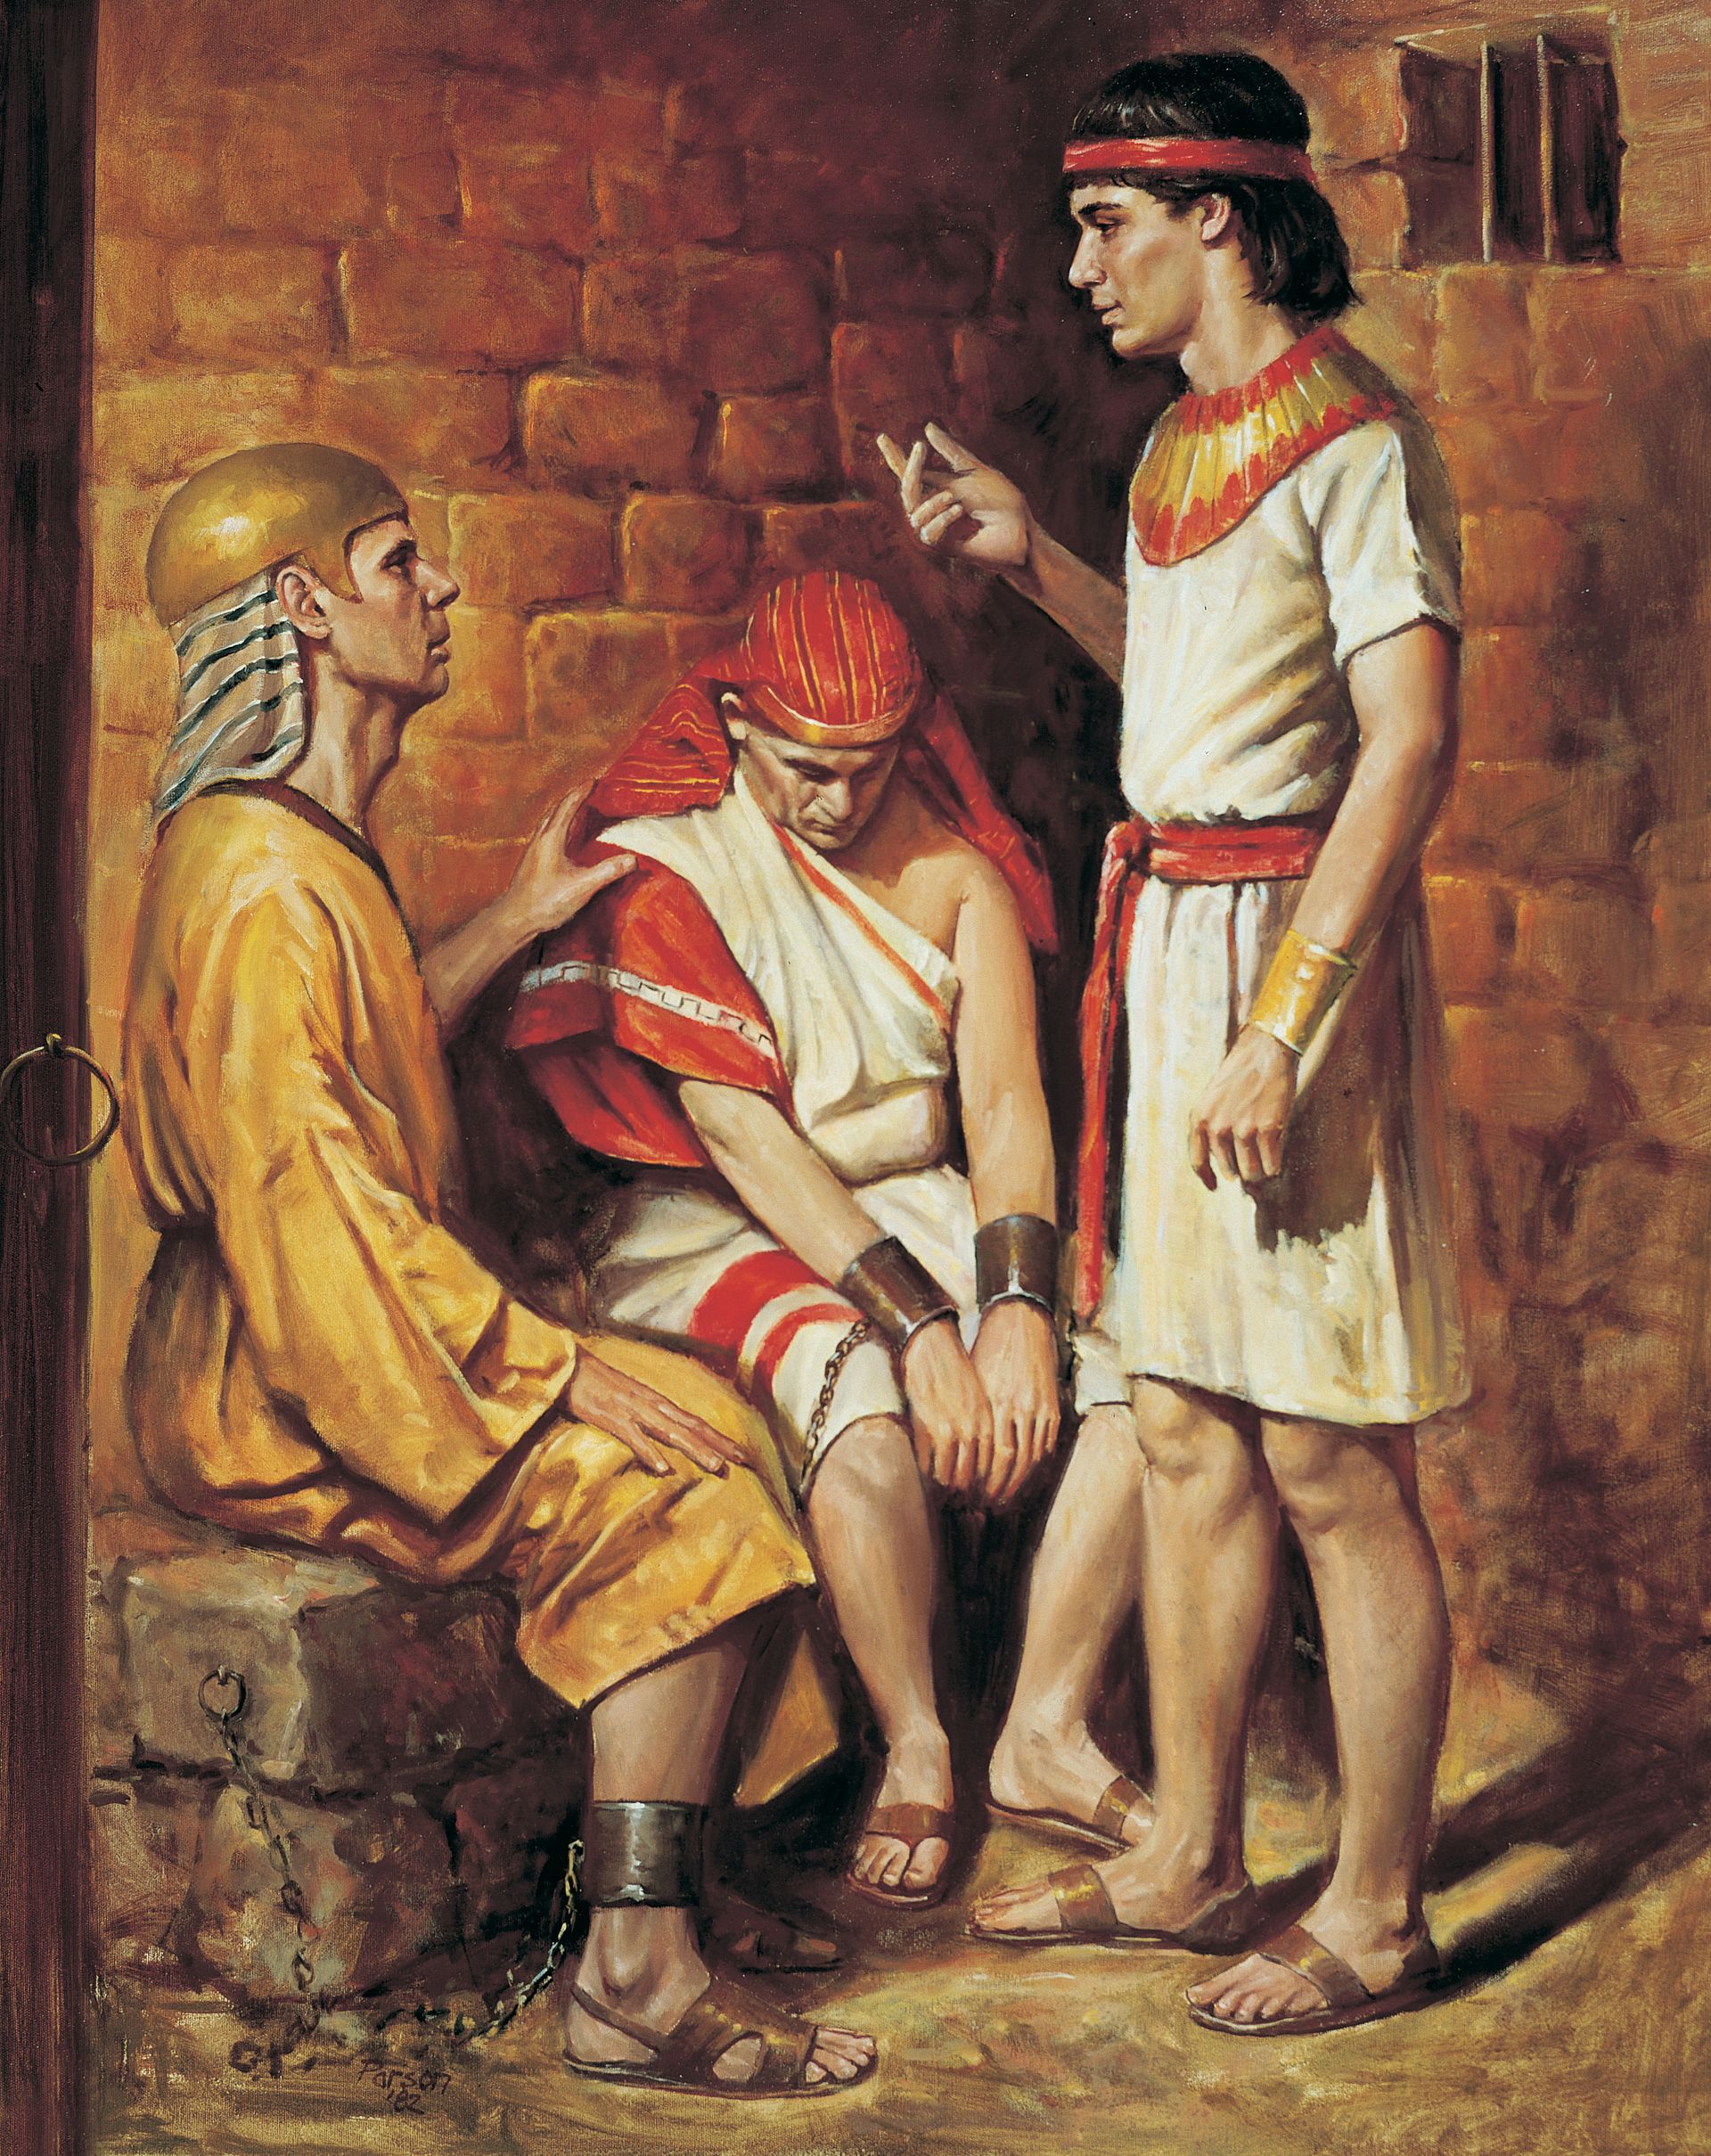 Joseph and the Butler and Baker (Joseph Interprets the Pharaoh’s Servants’ Dreams, by Del Parson; Primary manual 6-19